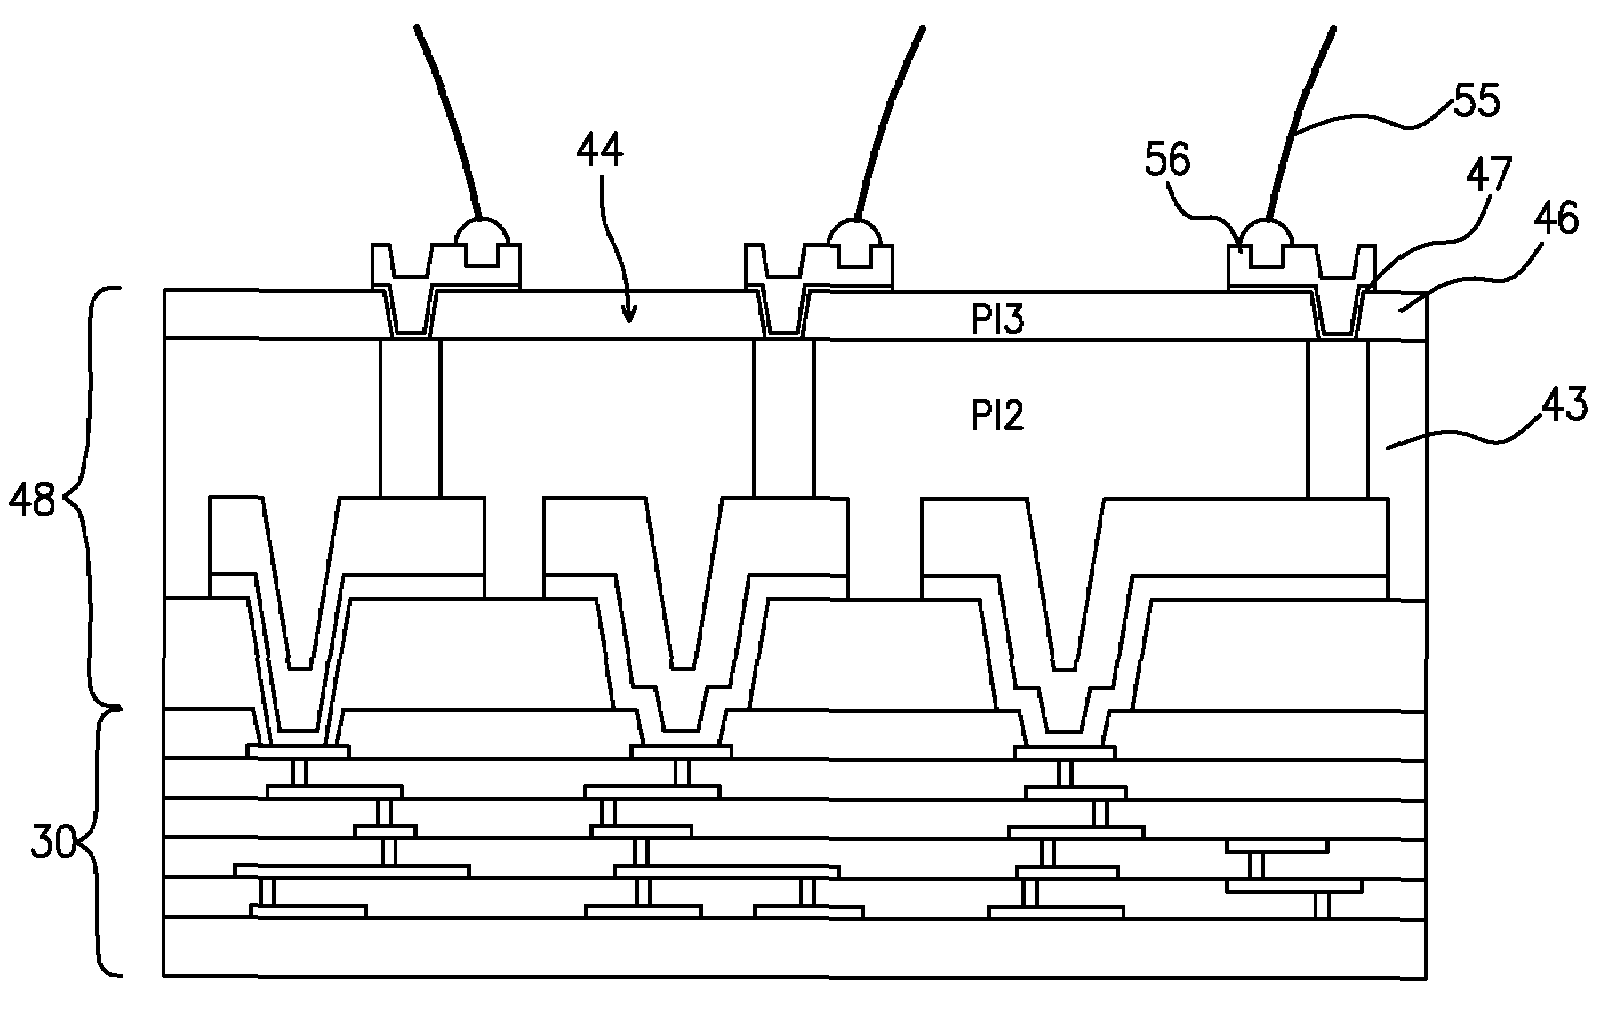 Post passivation structure for a semiconductor device and packaging process for same